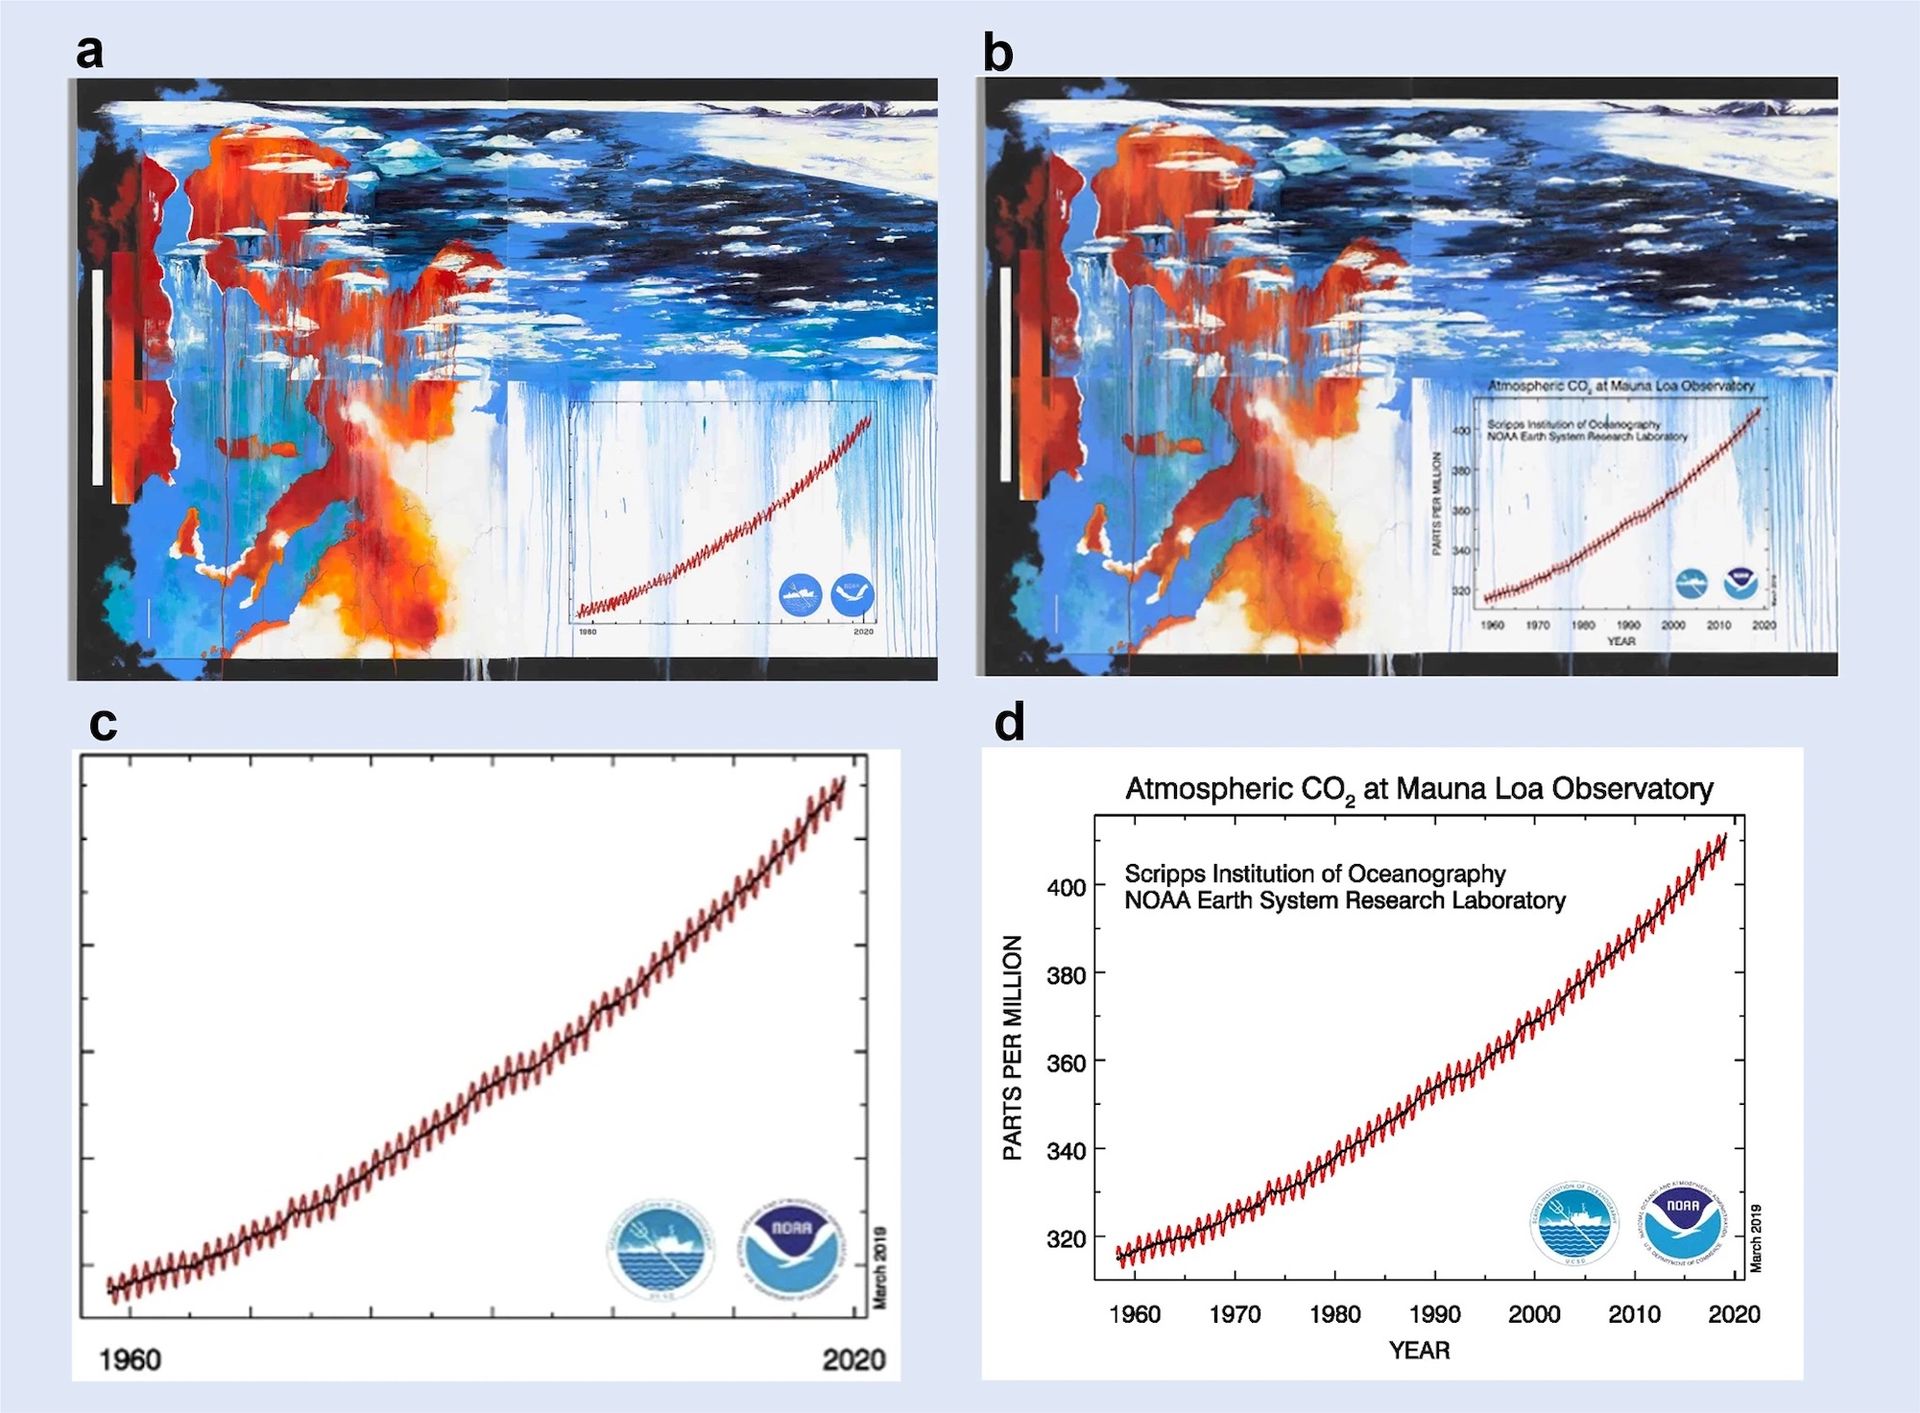 Artists’ depictions of climate data can cut through politicisation of science, study finds